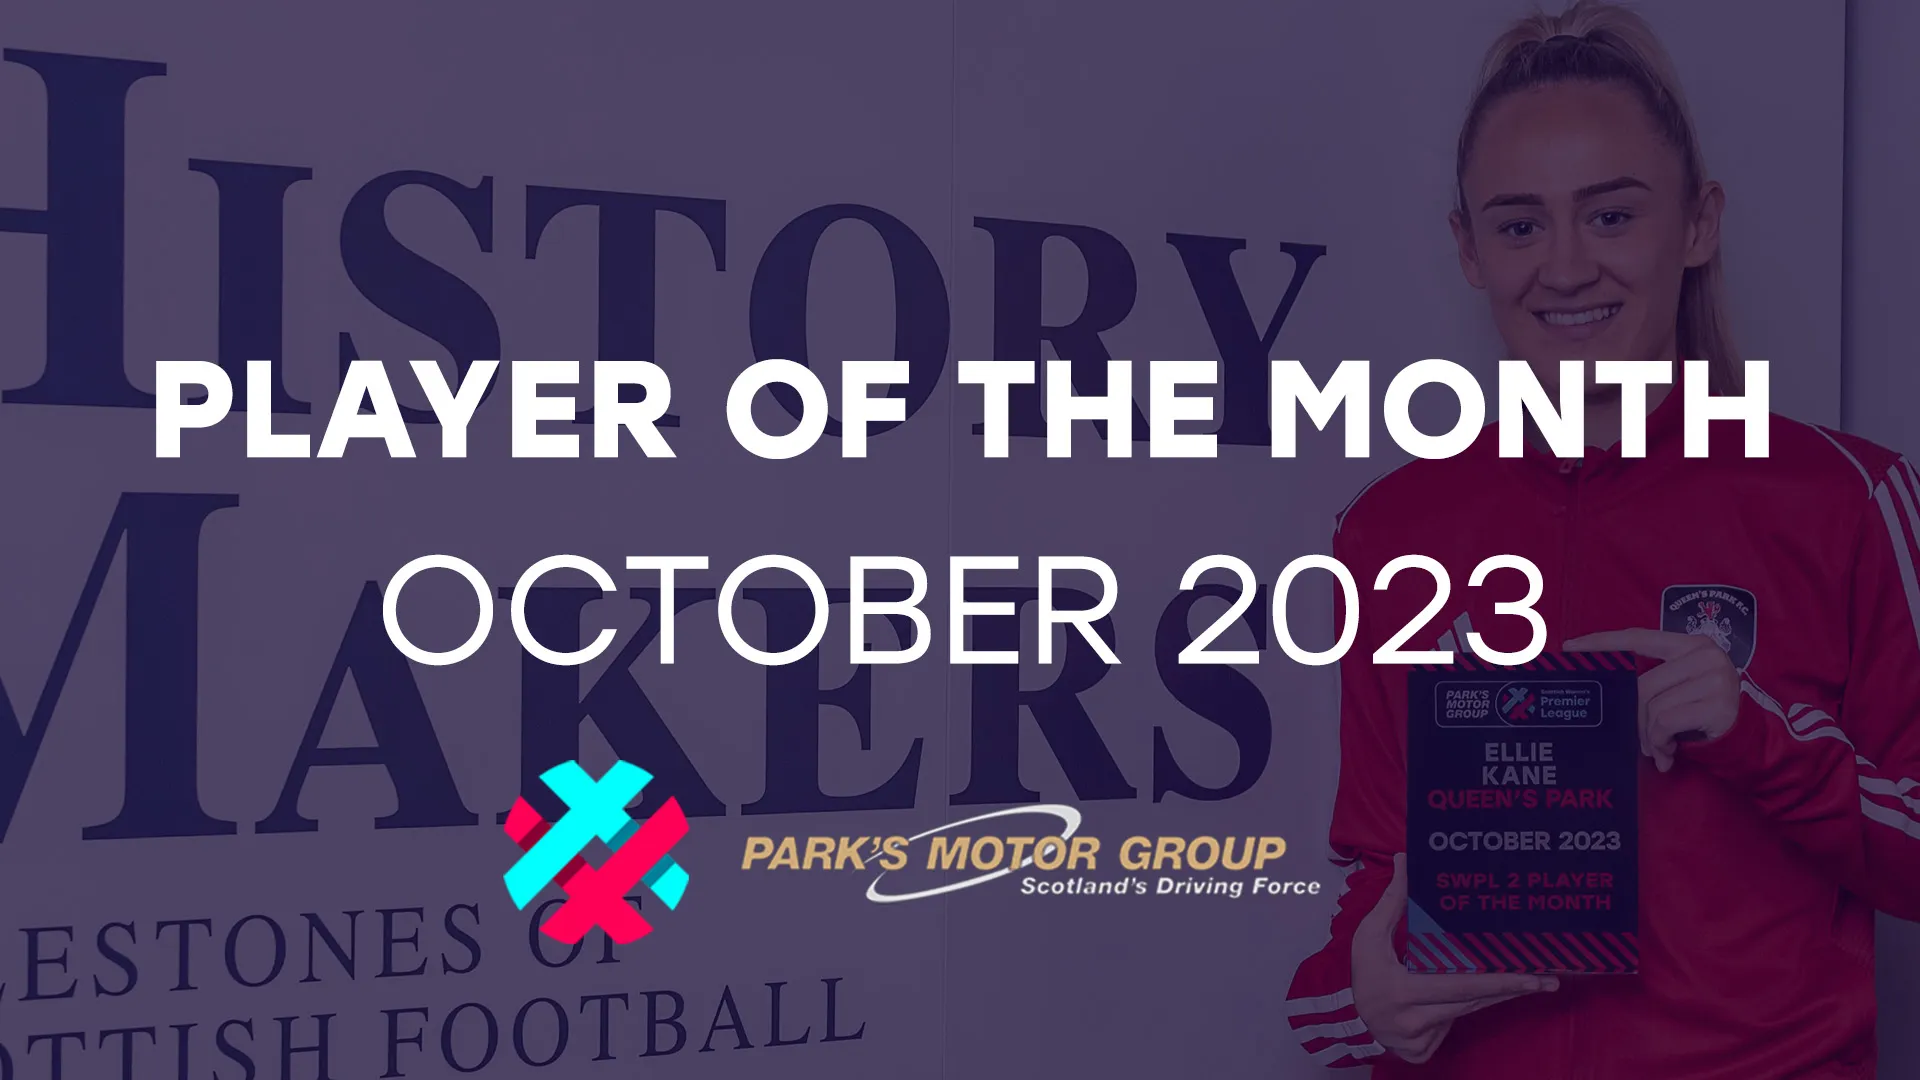 Image for Ellie Kane, Queen’s Park | SWPL 2 Player of the Month, Oct 2023 | Supported by Park’s Motor Group